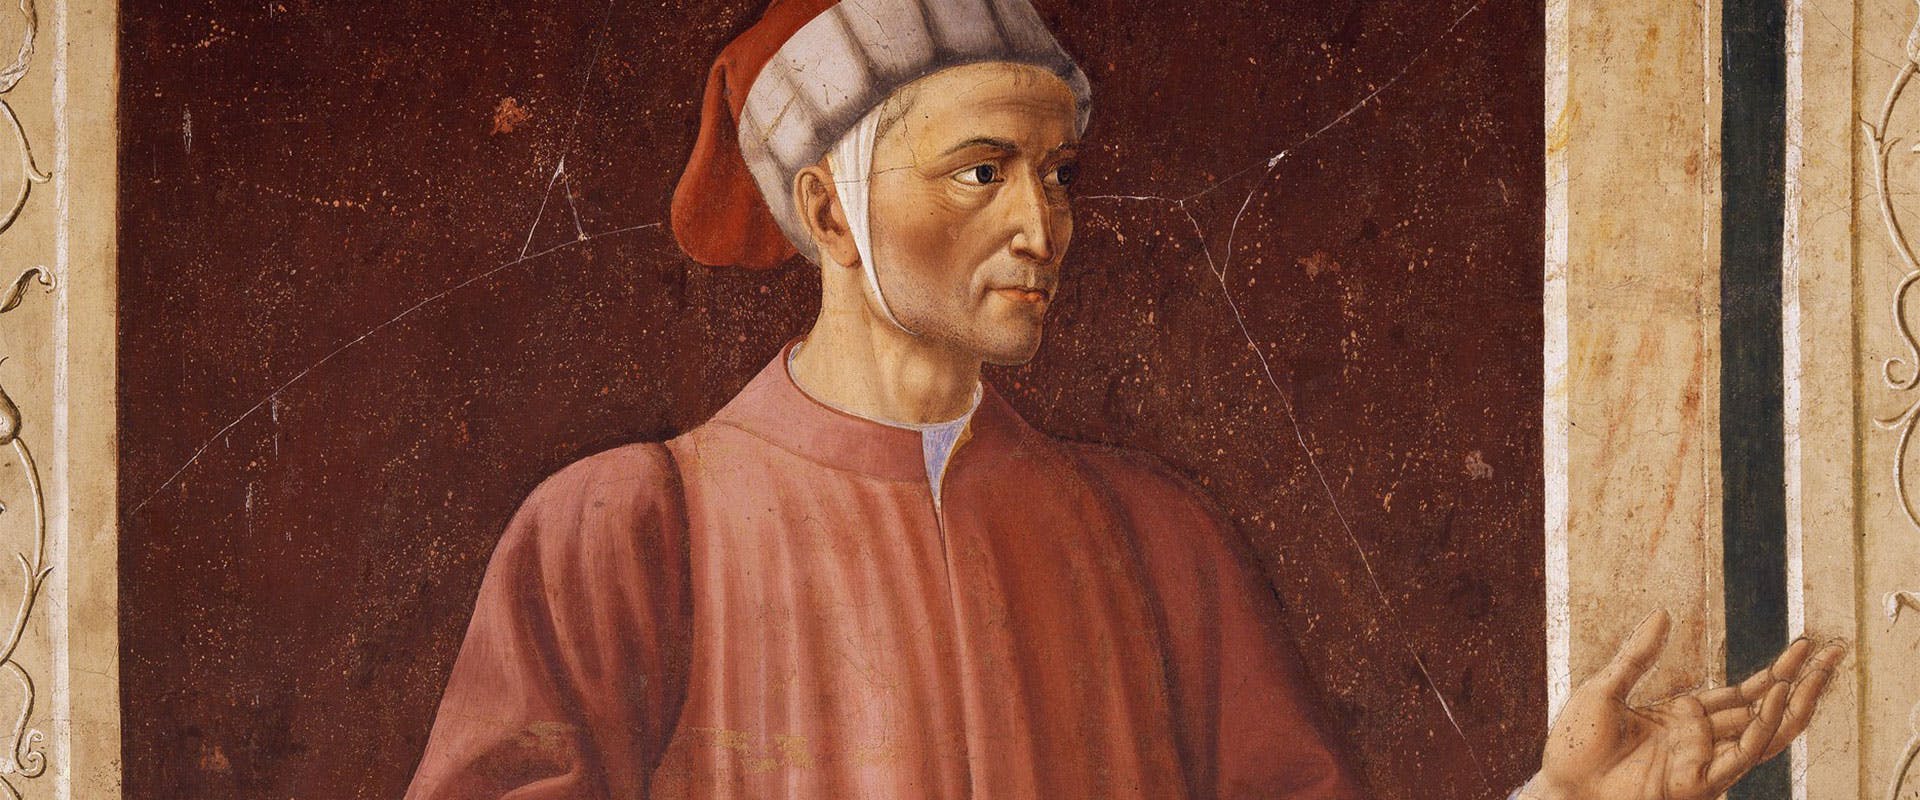 Forlì and the Uffizi join forces for the major exhibition dedicated to Dante